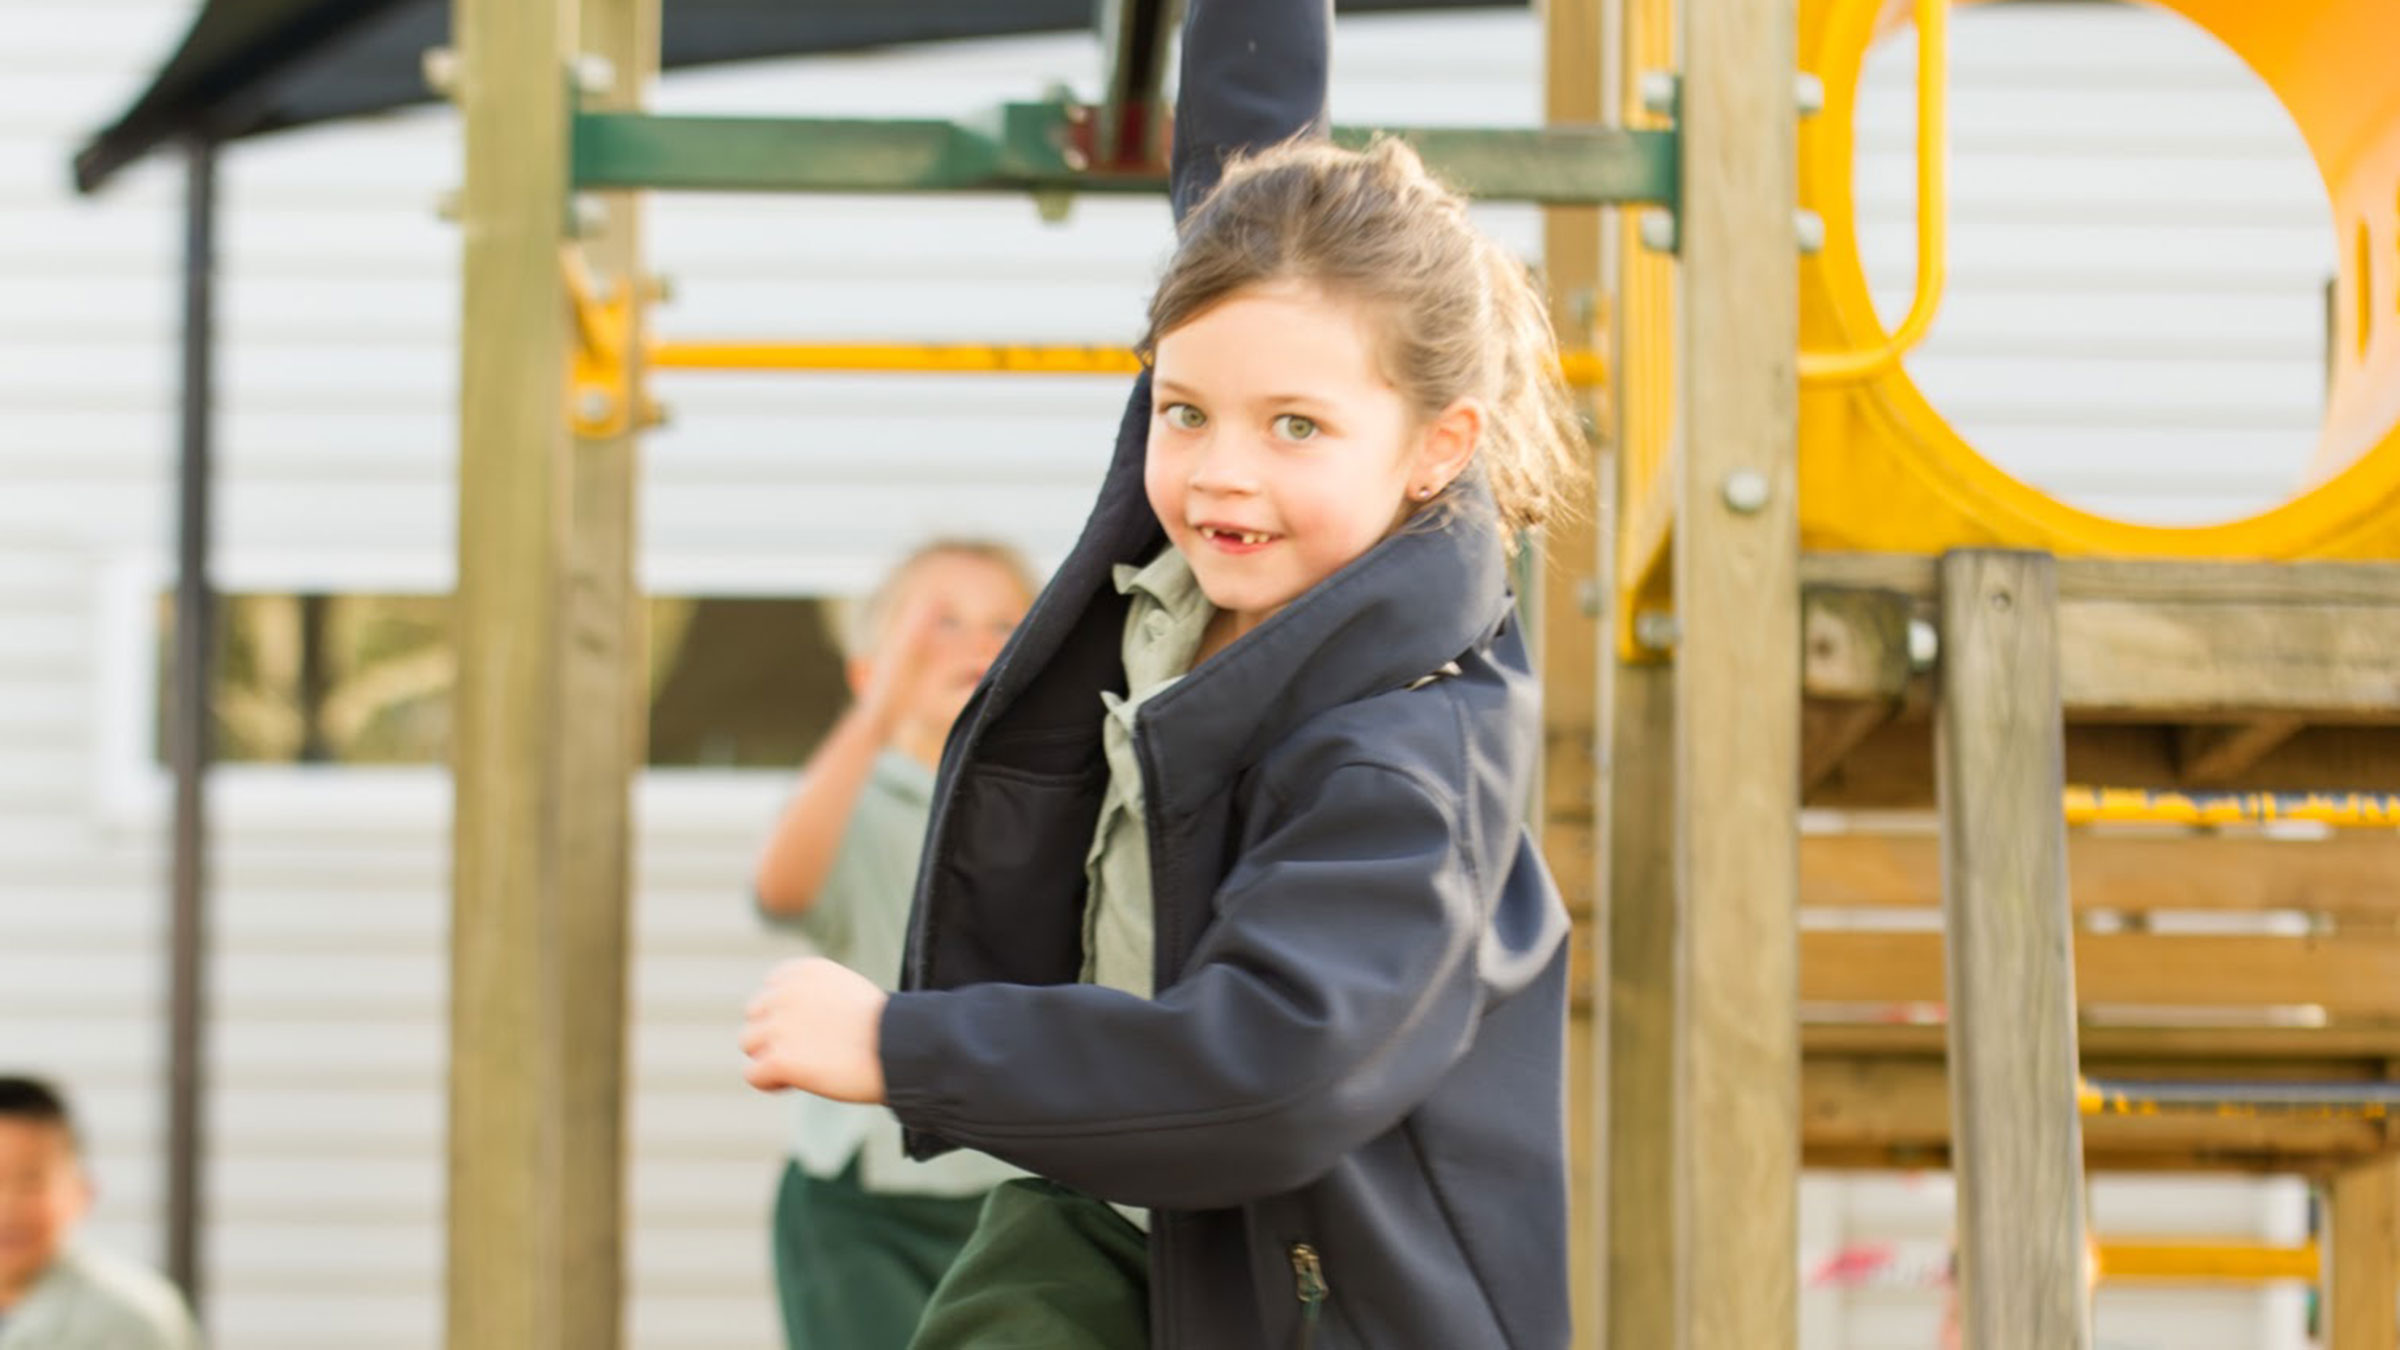 A young girl swinging on the bars in a playground.